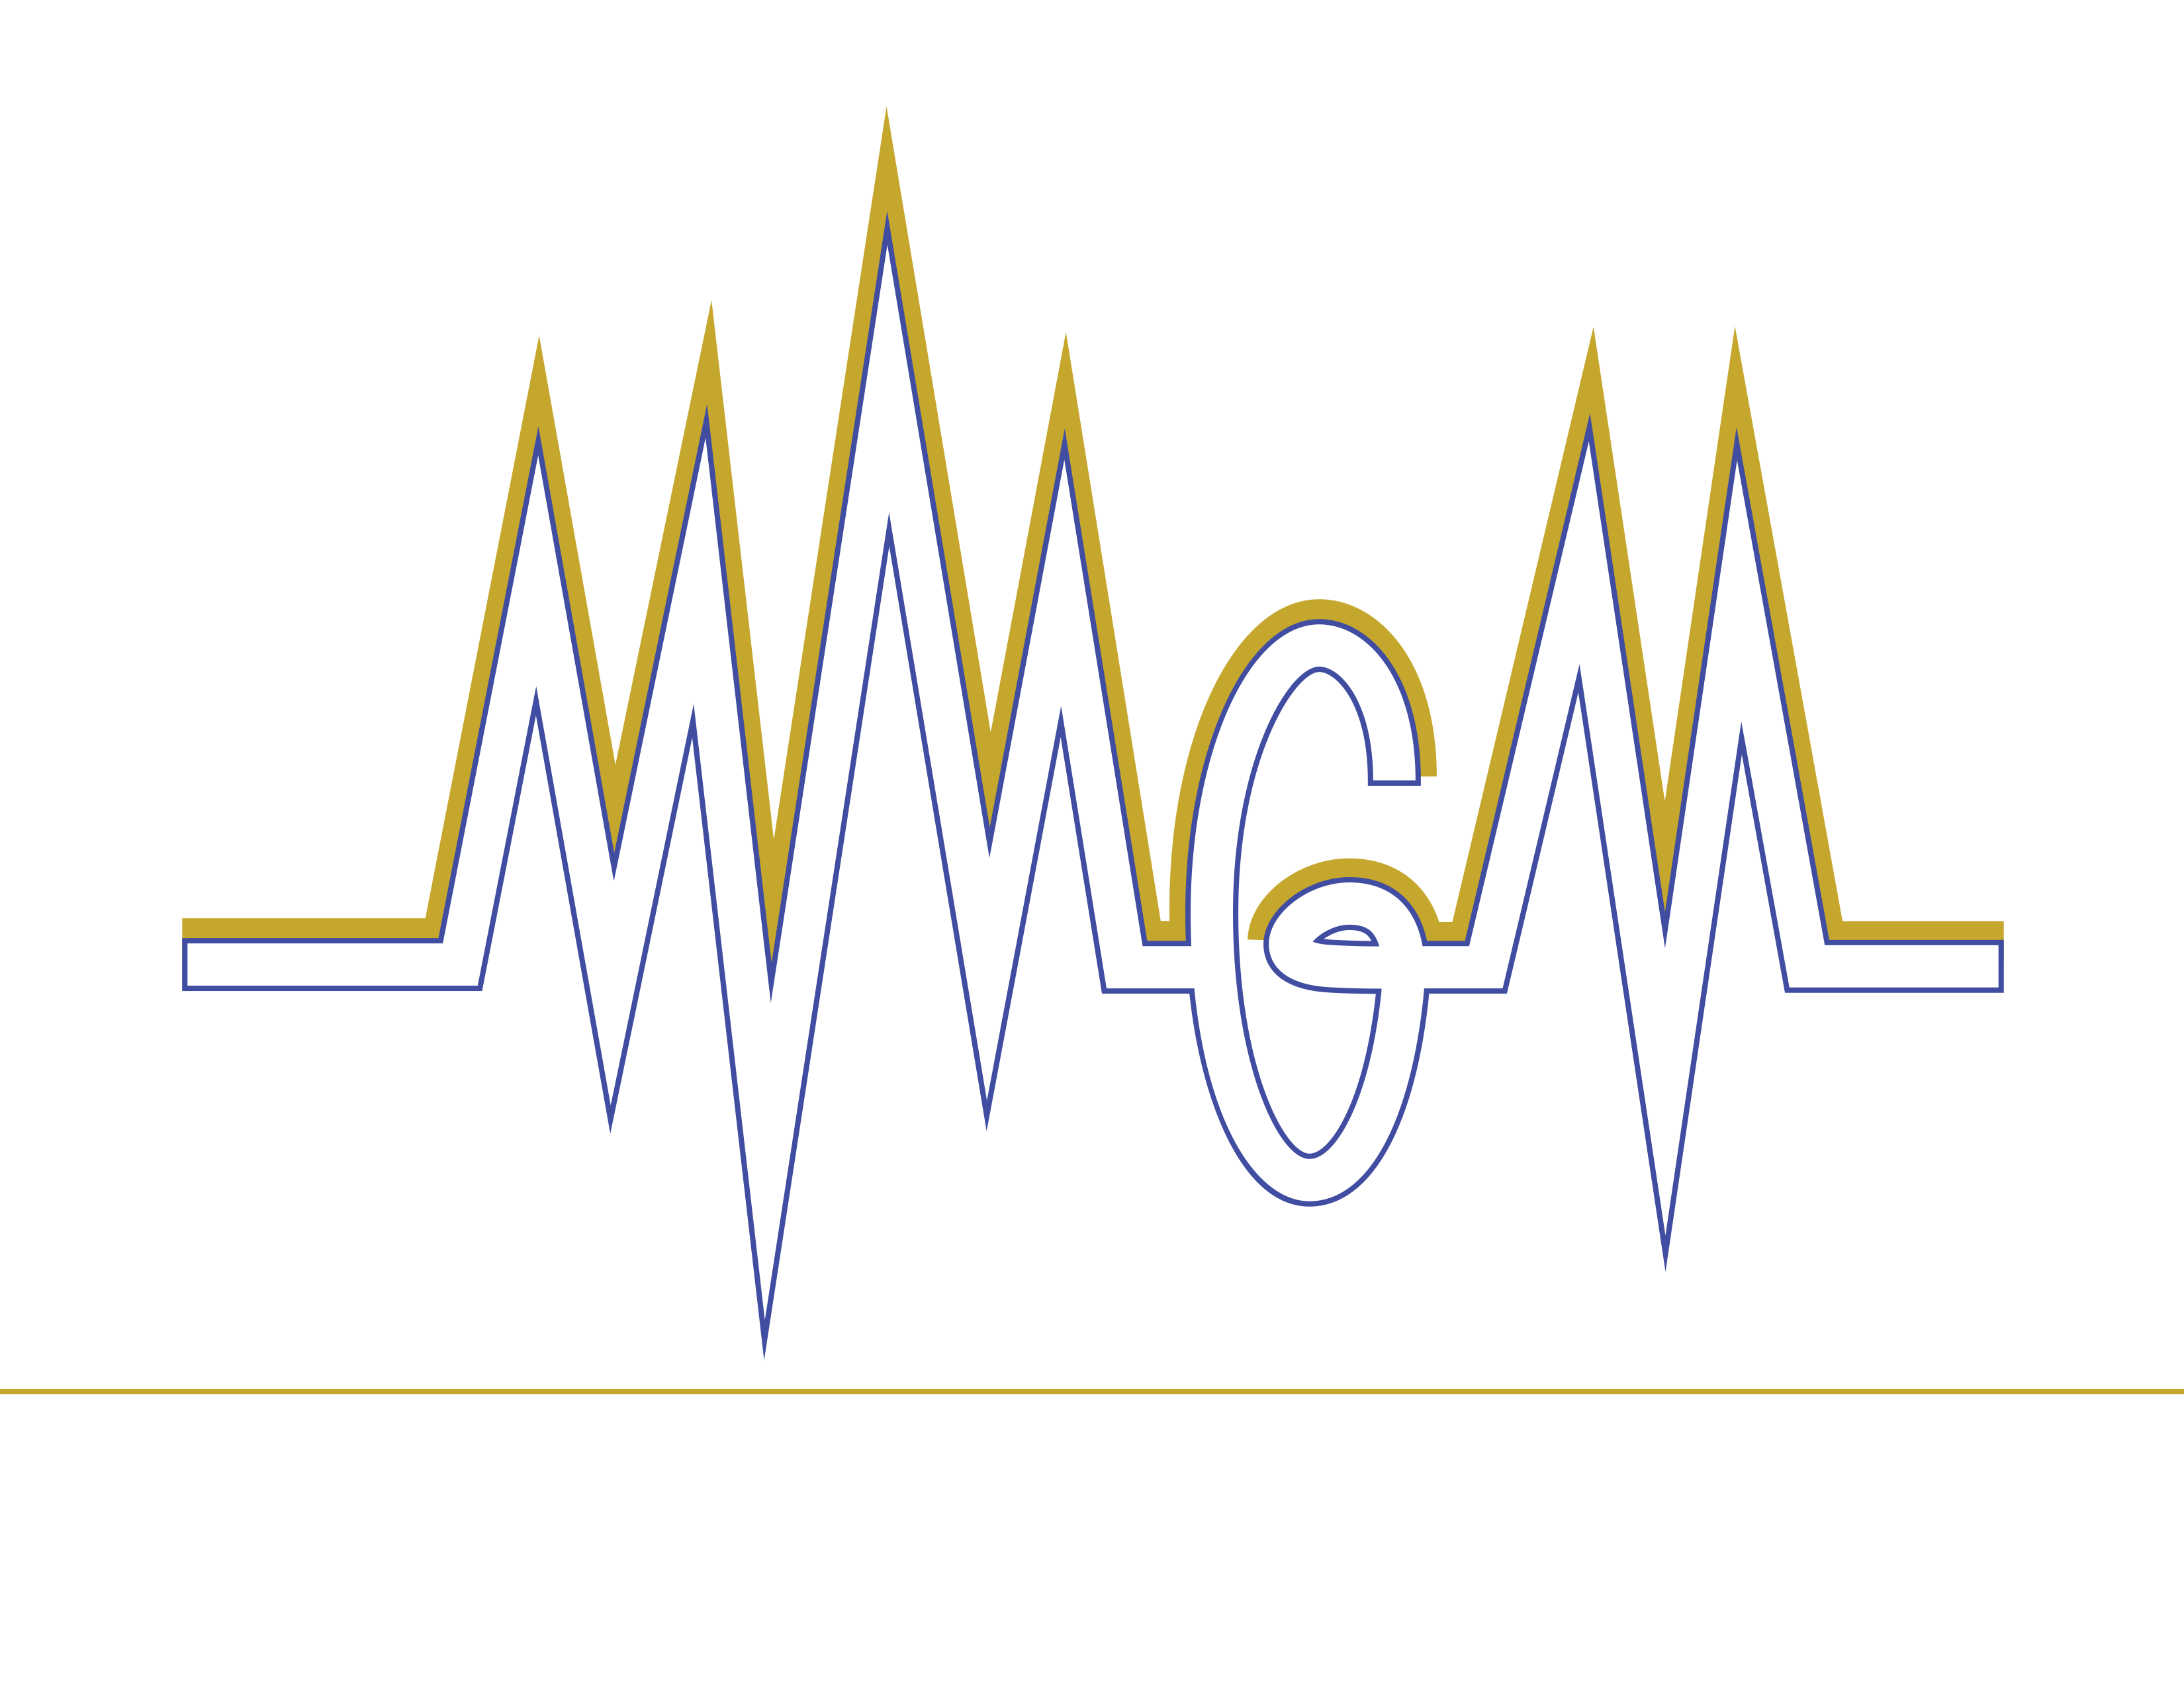 MMGM mixing and mastering good music